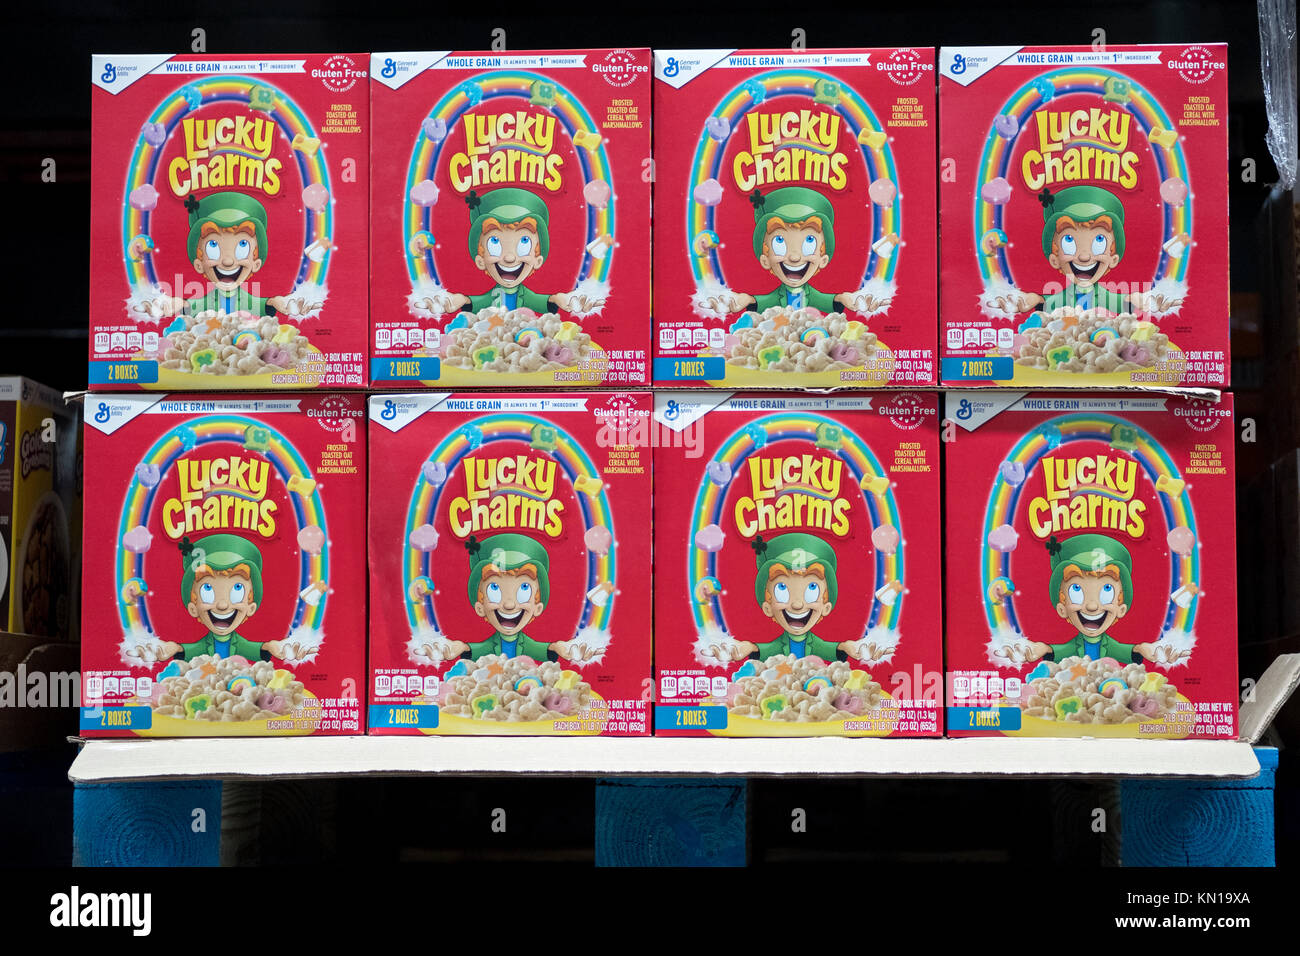 Large size double boxes of Lucky Charms cereal for sale at BJ's Wholesale Club in Whitestone, Queens, New York. Stock Photo